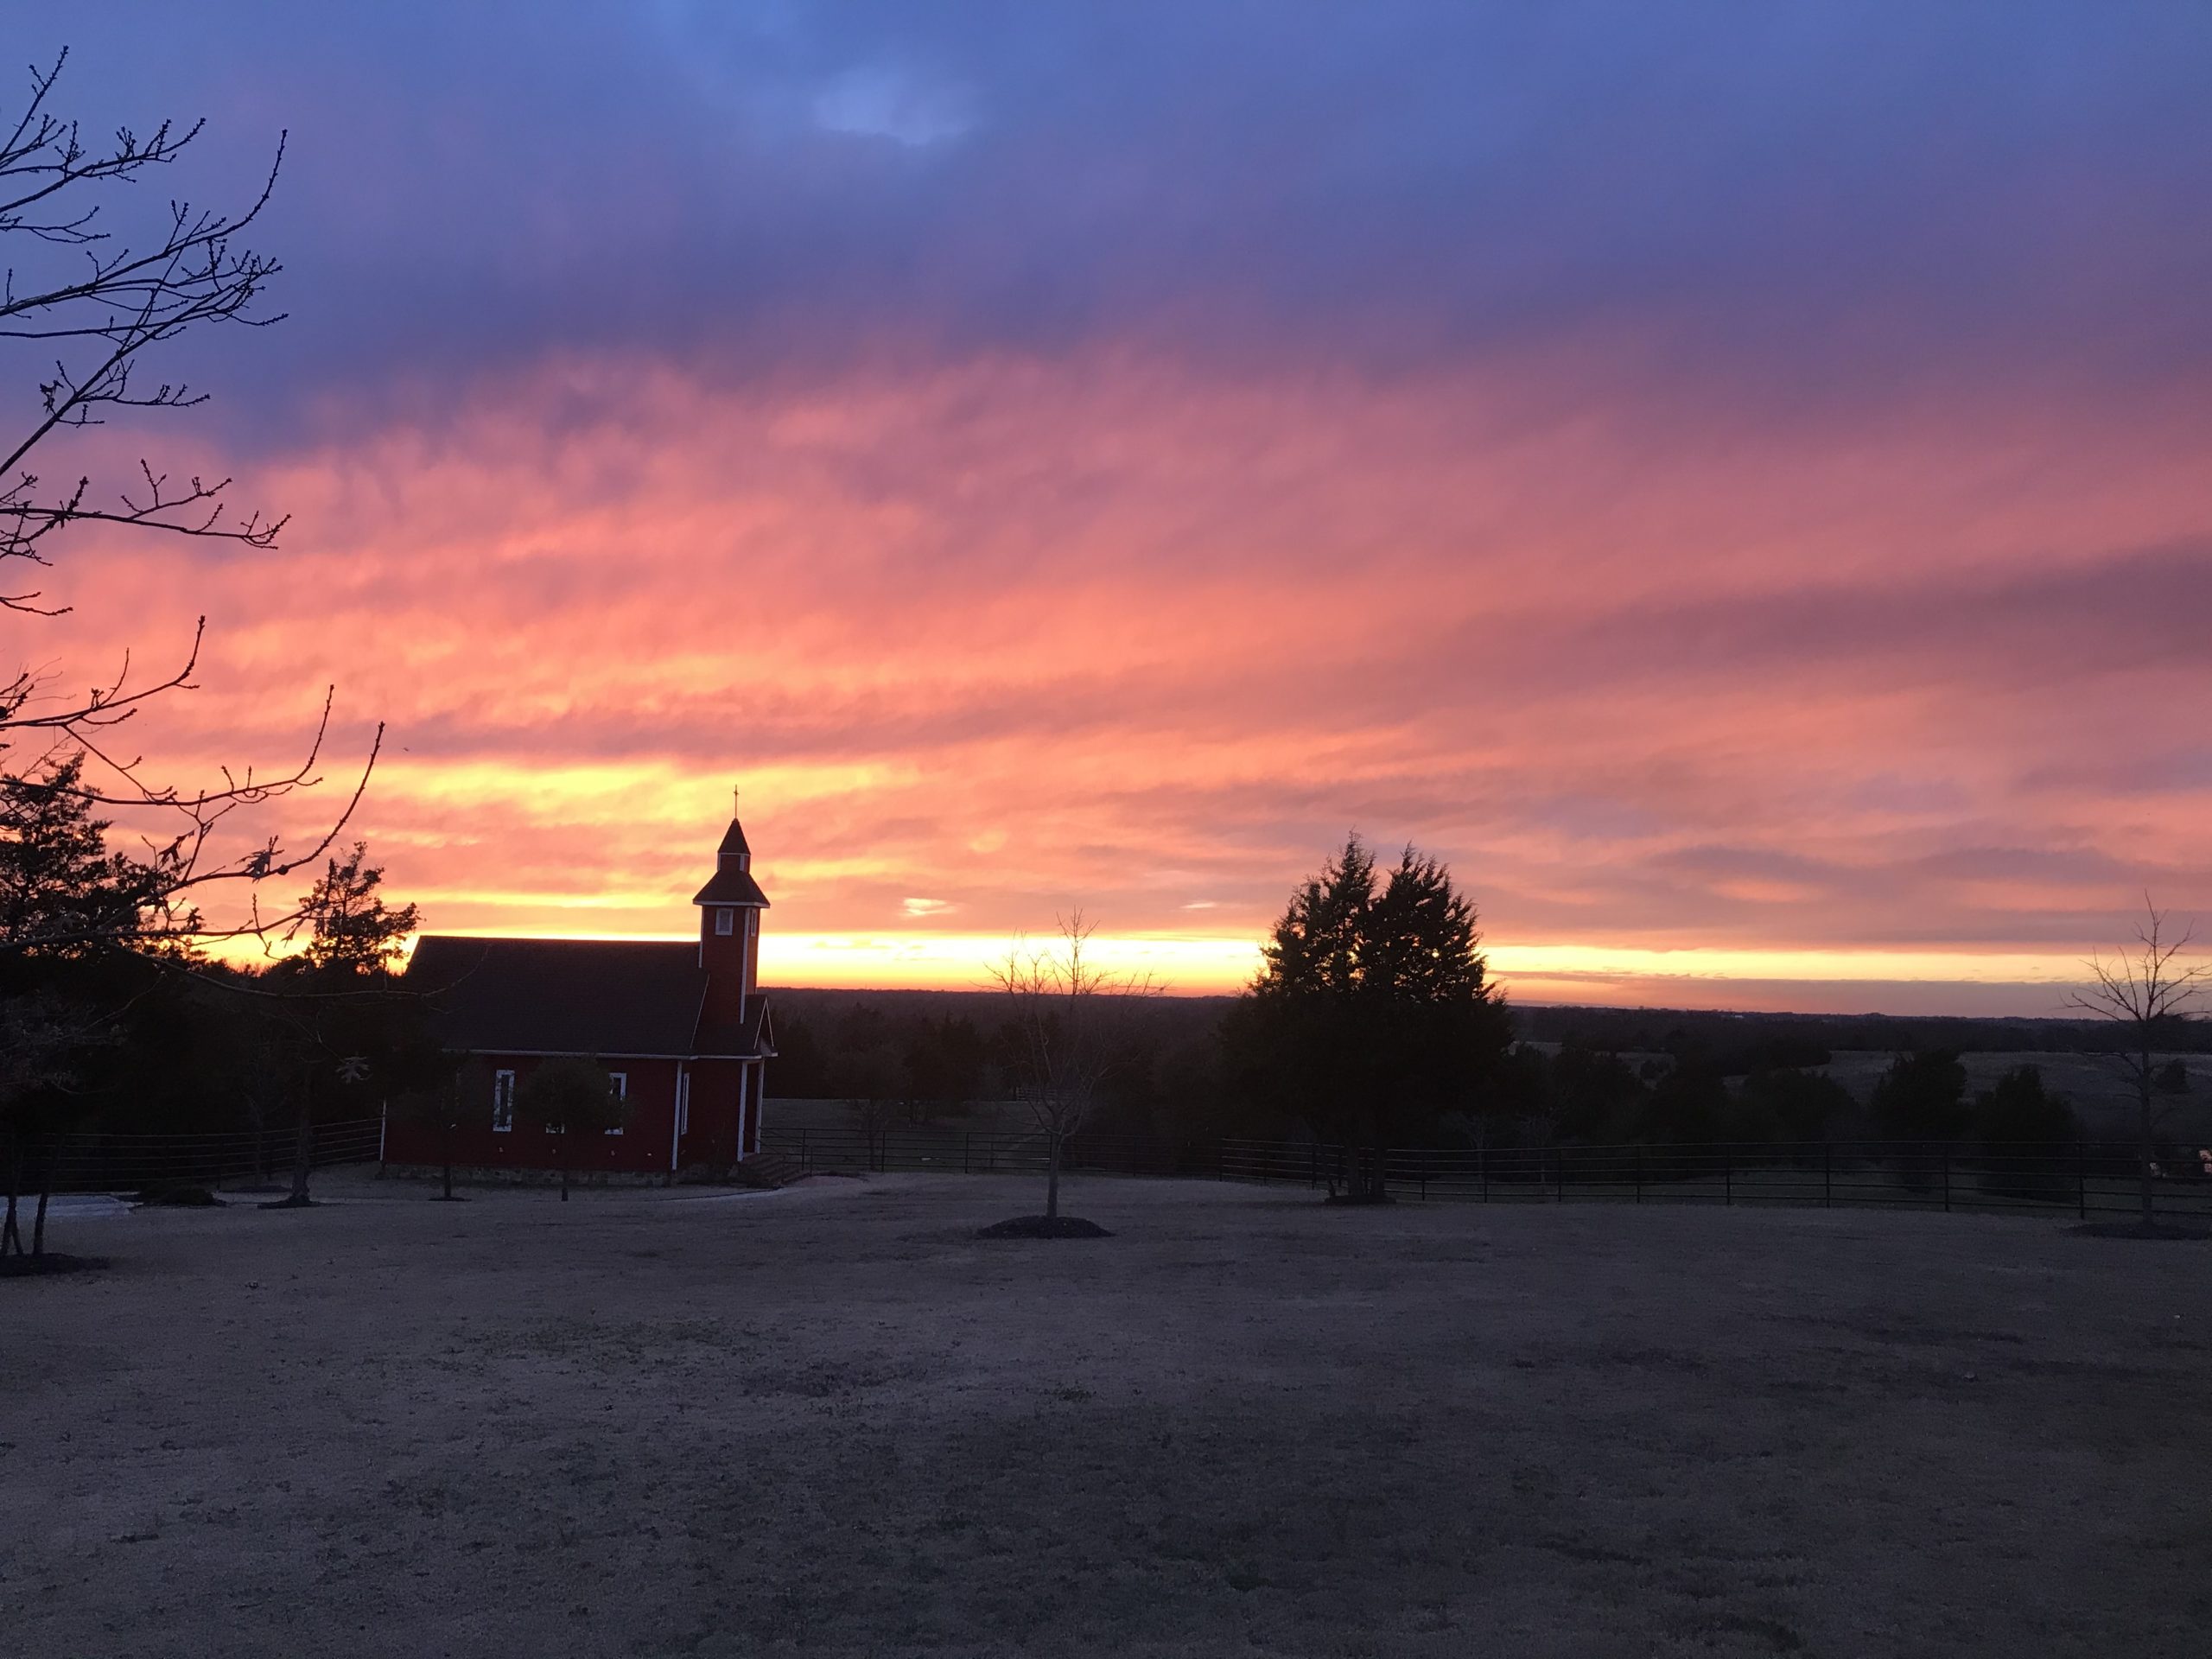 Sunset on the ranch